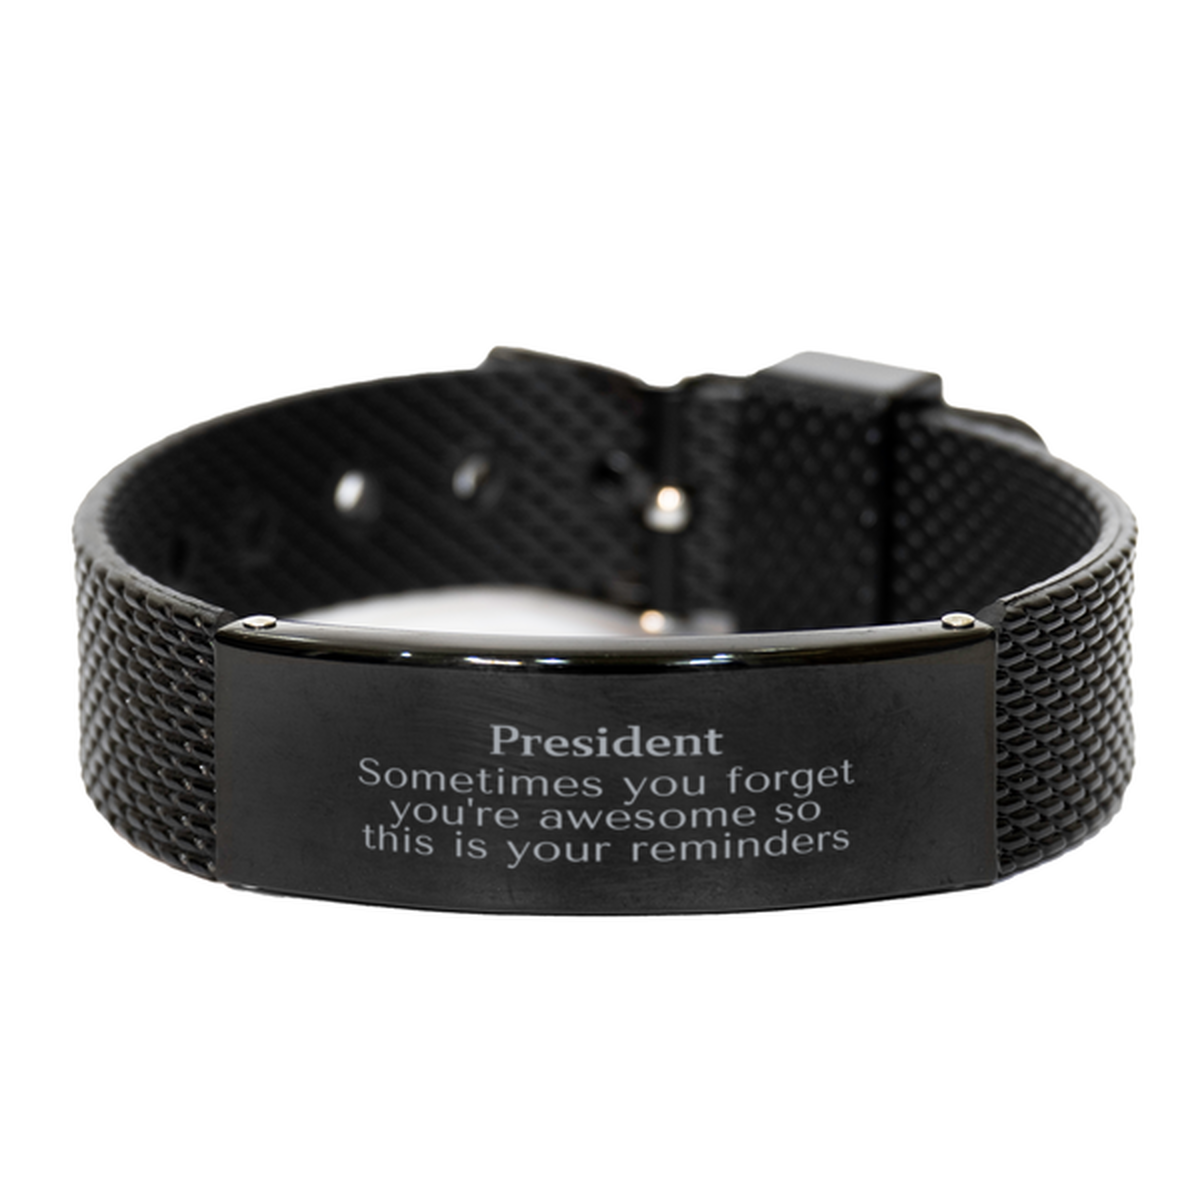 Sentimental President Black Shark Mesh Bracelet, President Sometimes you forget you're awesome so this is your reminders, Graduation Christmas Birthday Gifts for President, Men, Women, Coworkers